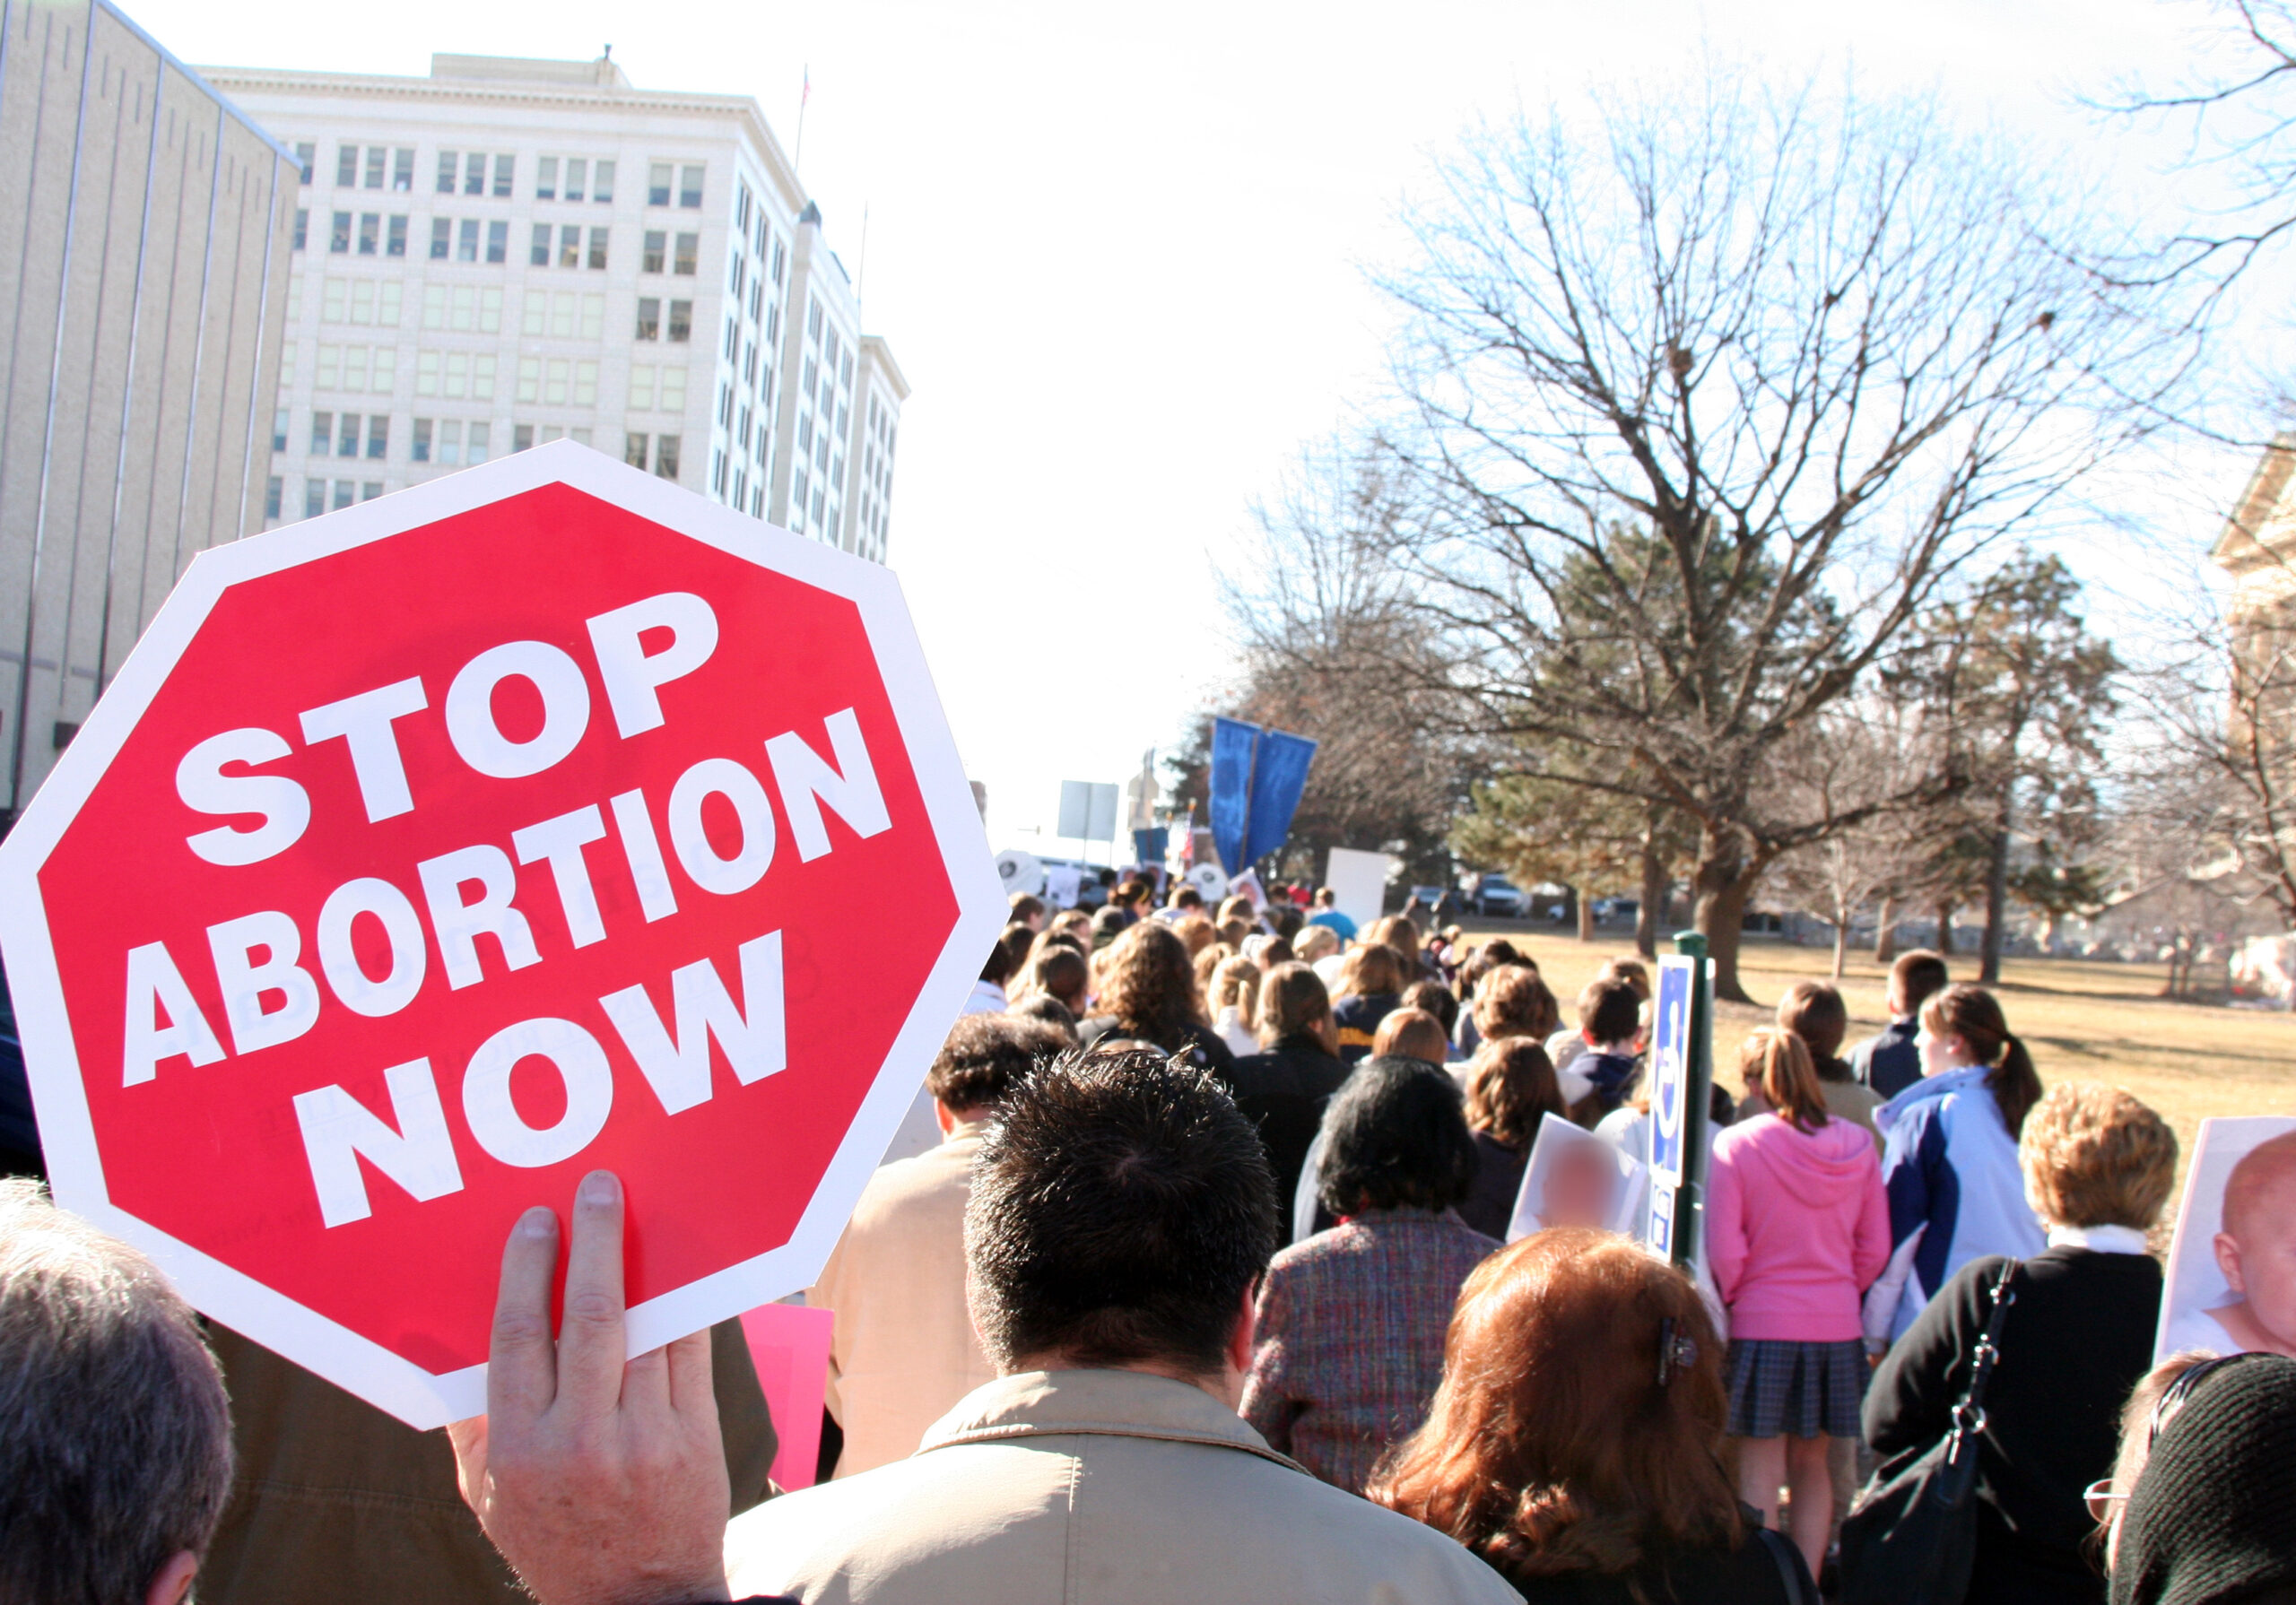 A group of people march on a sidewalk with one person holding a sign shaped like a STOP sign which reads "Stop Abortion Now."